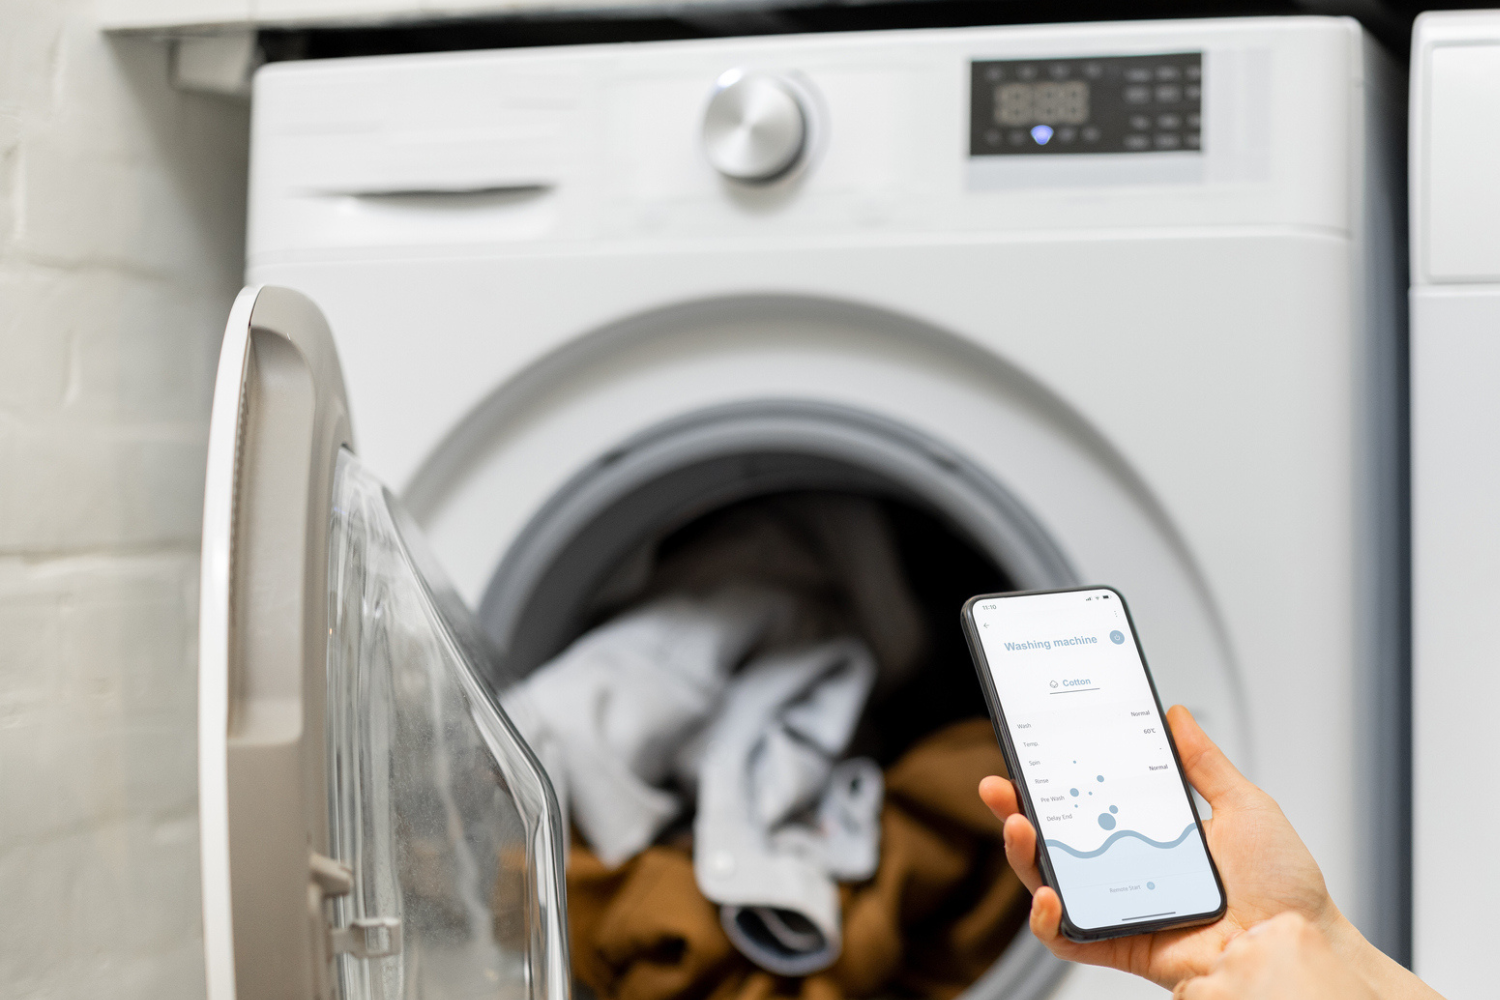 Homeowner Baffled After Washing Machine Uses 3.6GB of Internet Data a Day